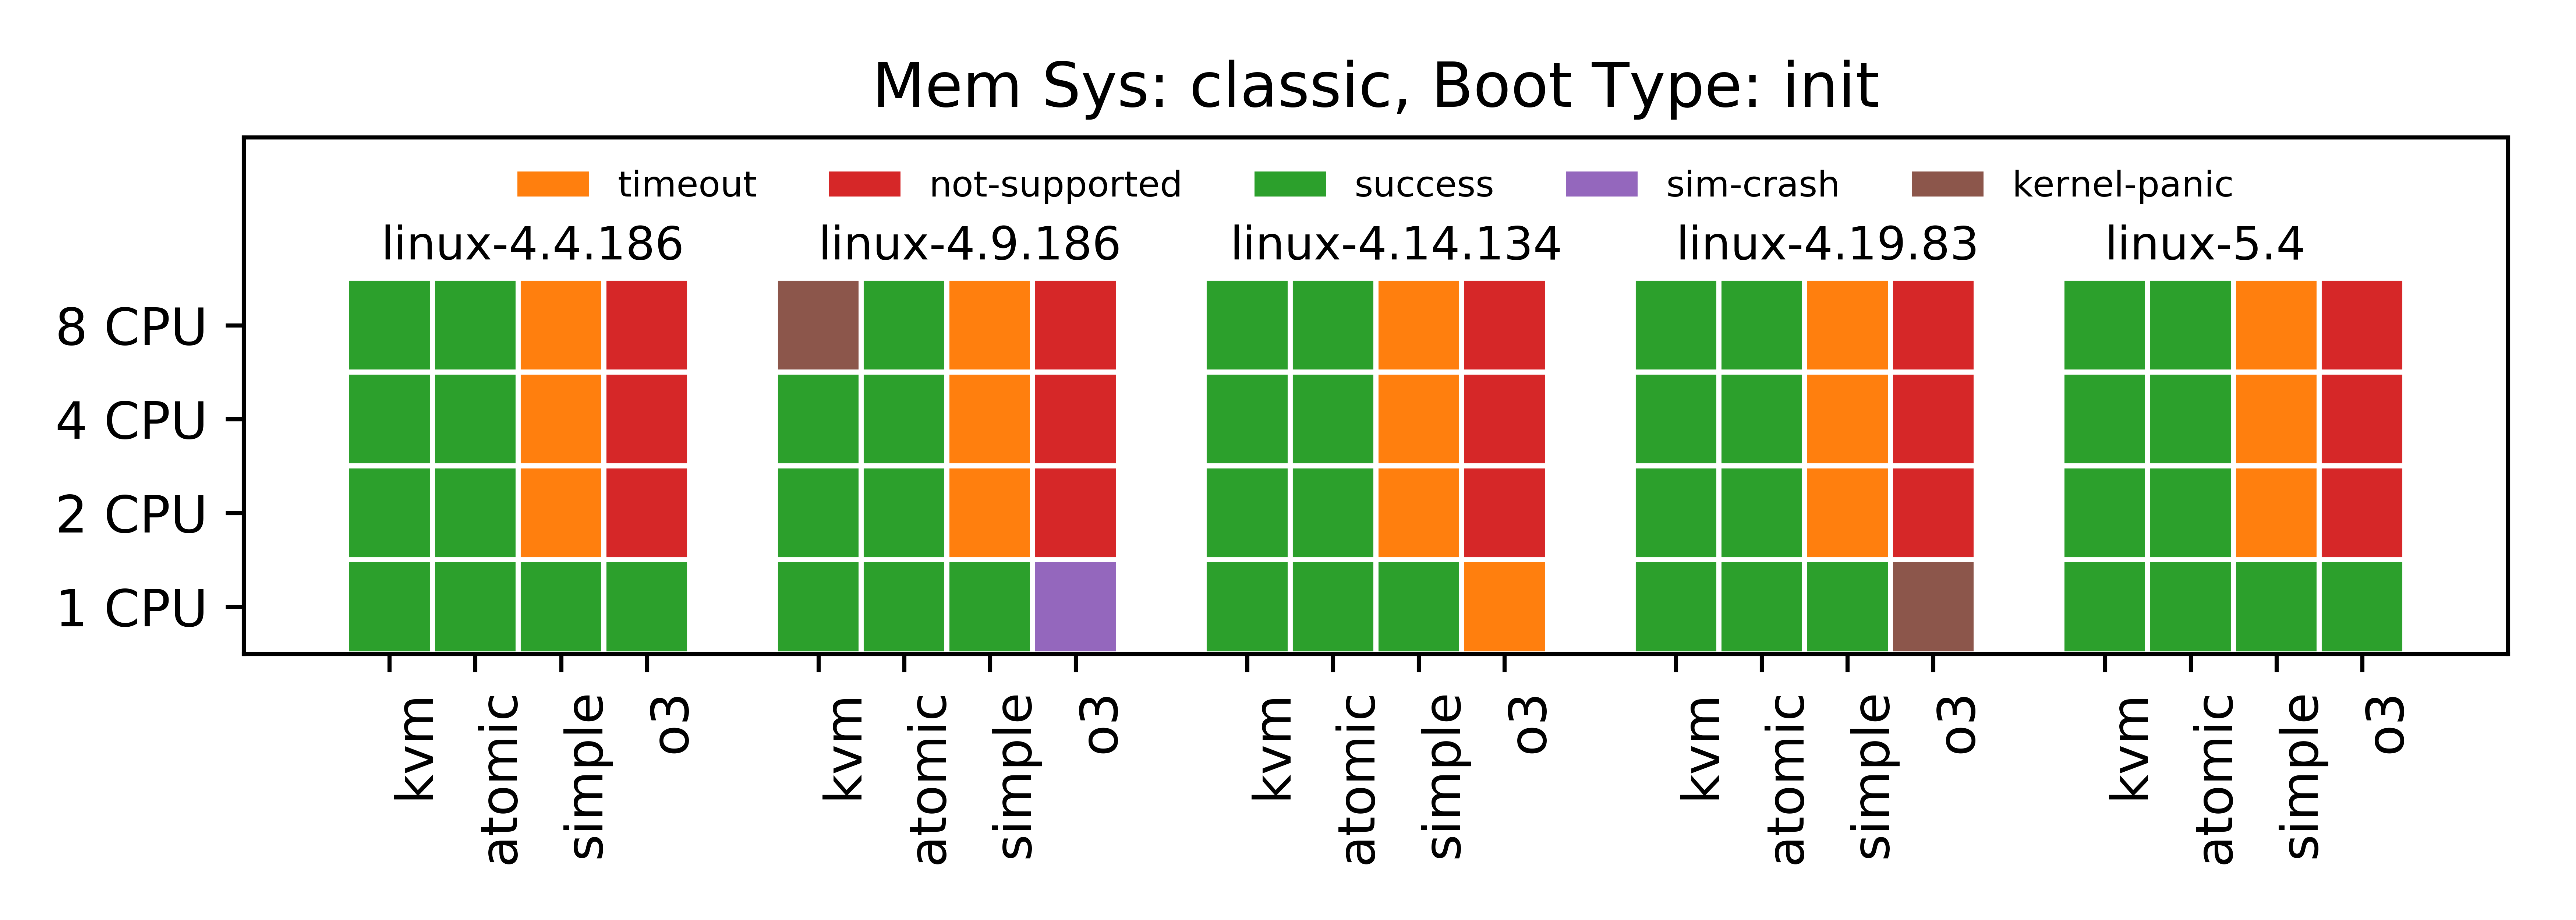 Linux boot status for classic memory system and init boot